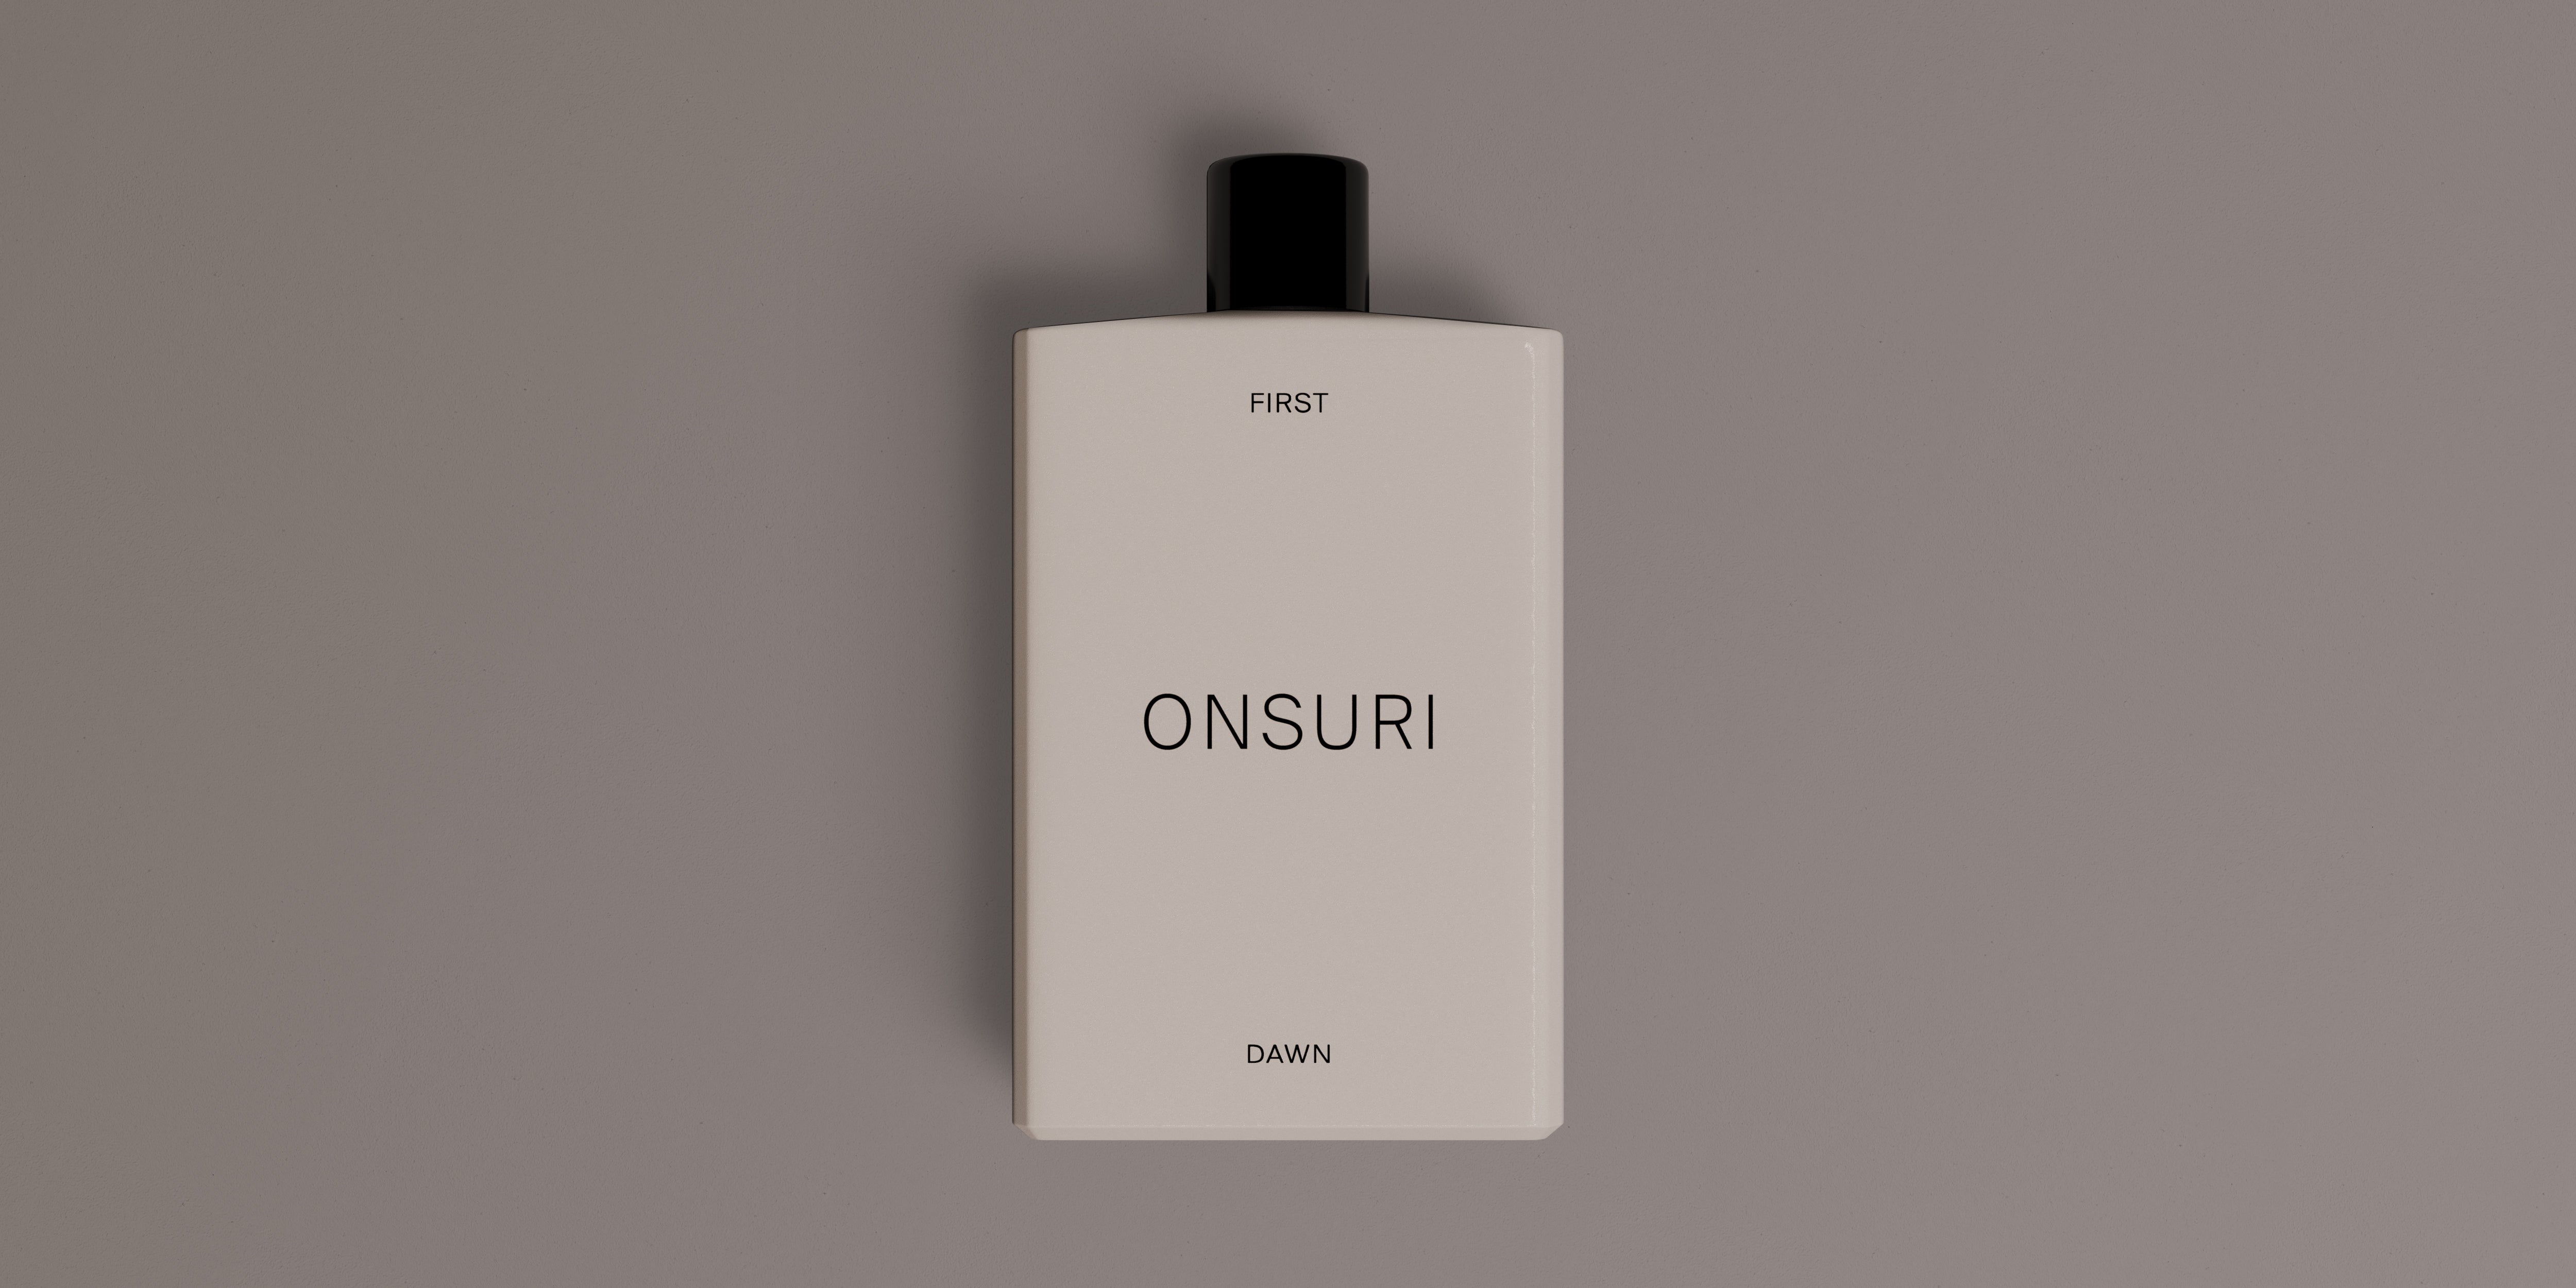 Onsuri’s First Dawn represents the year’s first crop: pressed from Koroneiki olives – newly full of summer’s nourishment and harvested in harmony with nature’s rhythms. In an oasis of artesian wells and olive groves, as the cool night subsides and the sun emerges over the horizon, careful hands select the crop’s finest offering for purity, robustness and extraordinary depth of flavour; truly, the land’s most remarkable fruit.